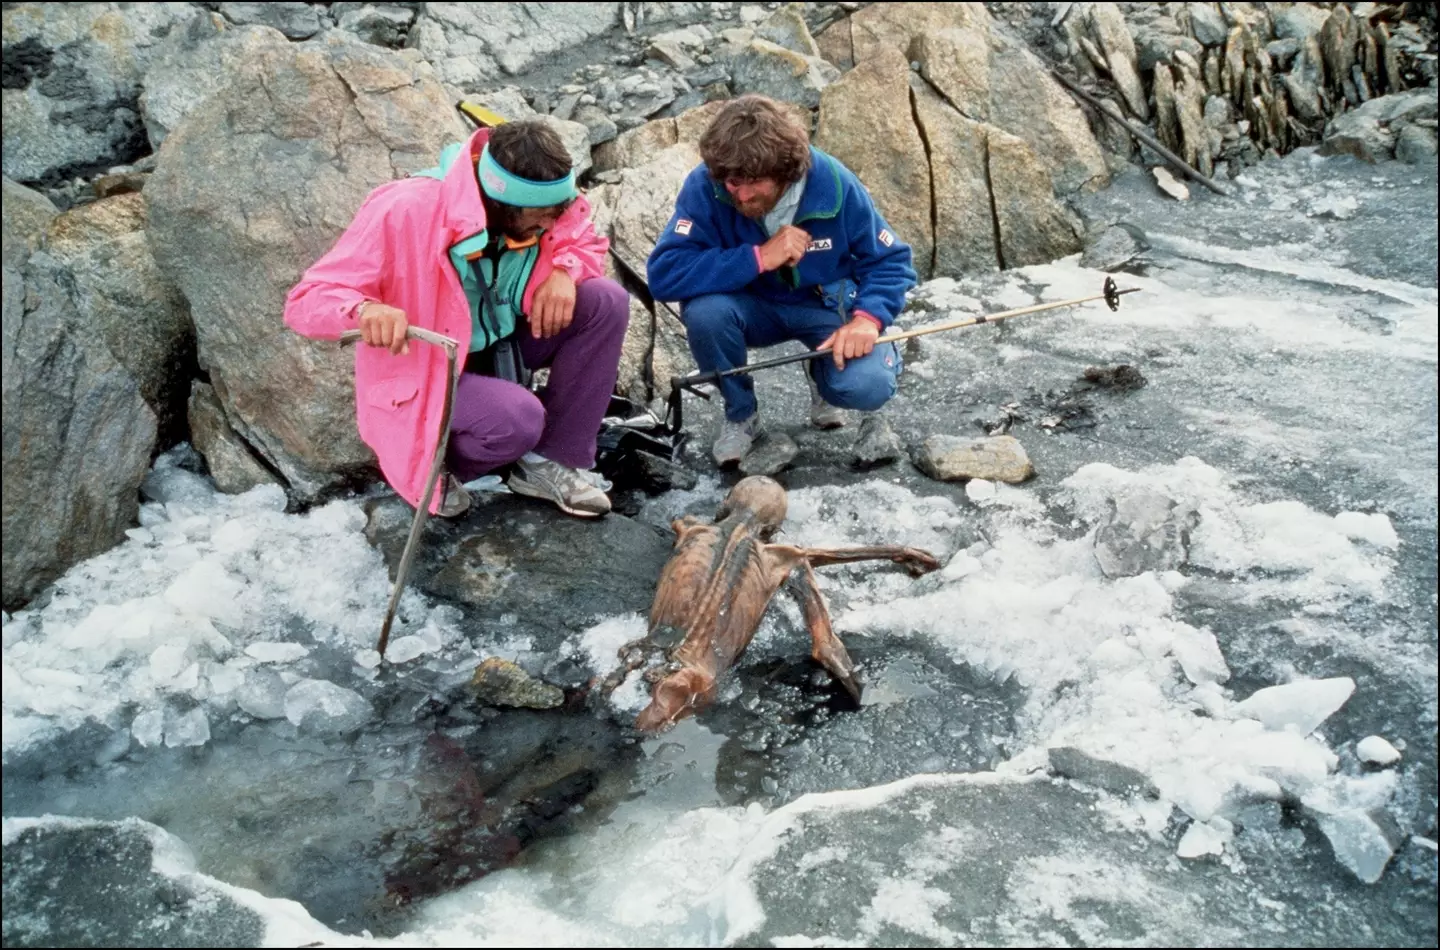 When mountain officials attempted to recover the body they found that the body was frozen in ice below the torso.